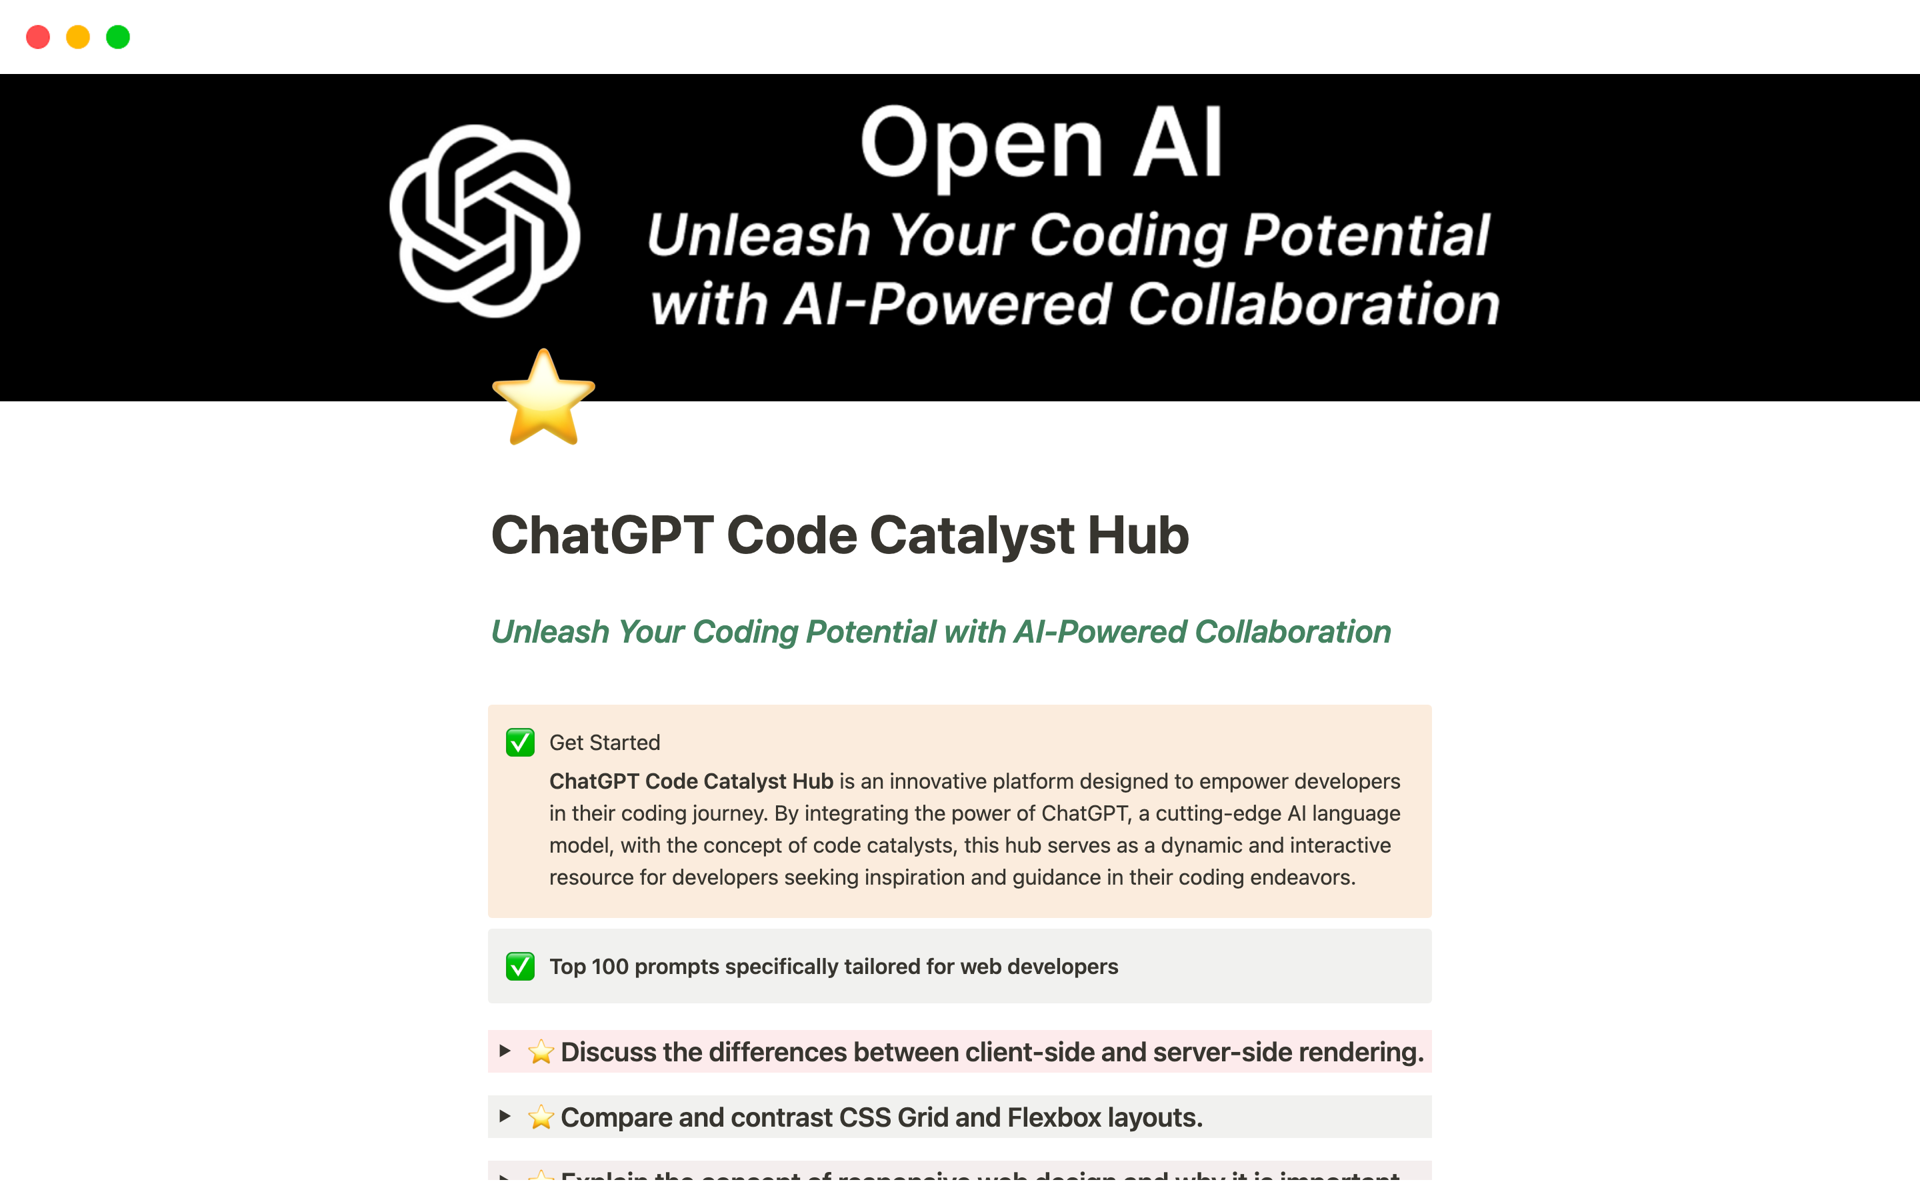 Unleash Your Coding Potential with AI-Powered Collaboration